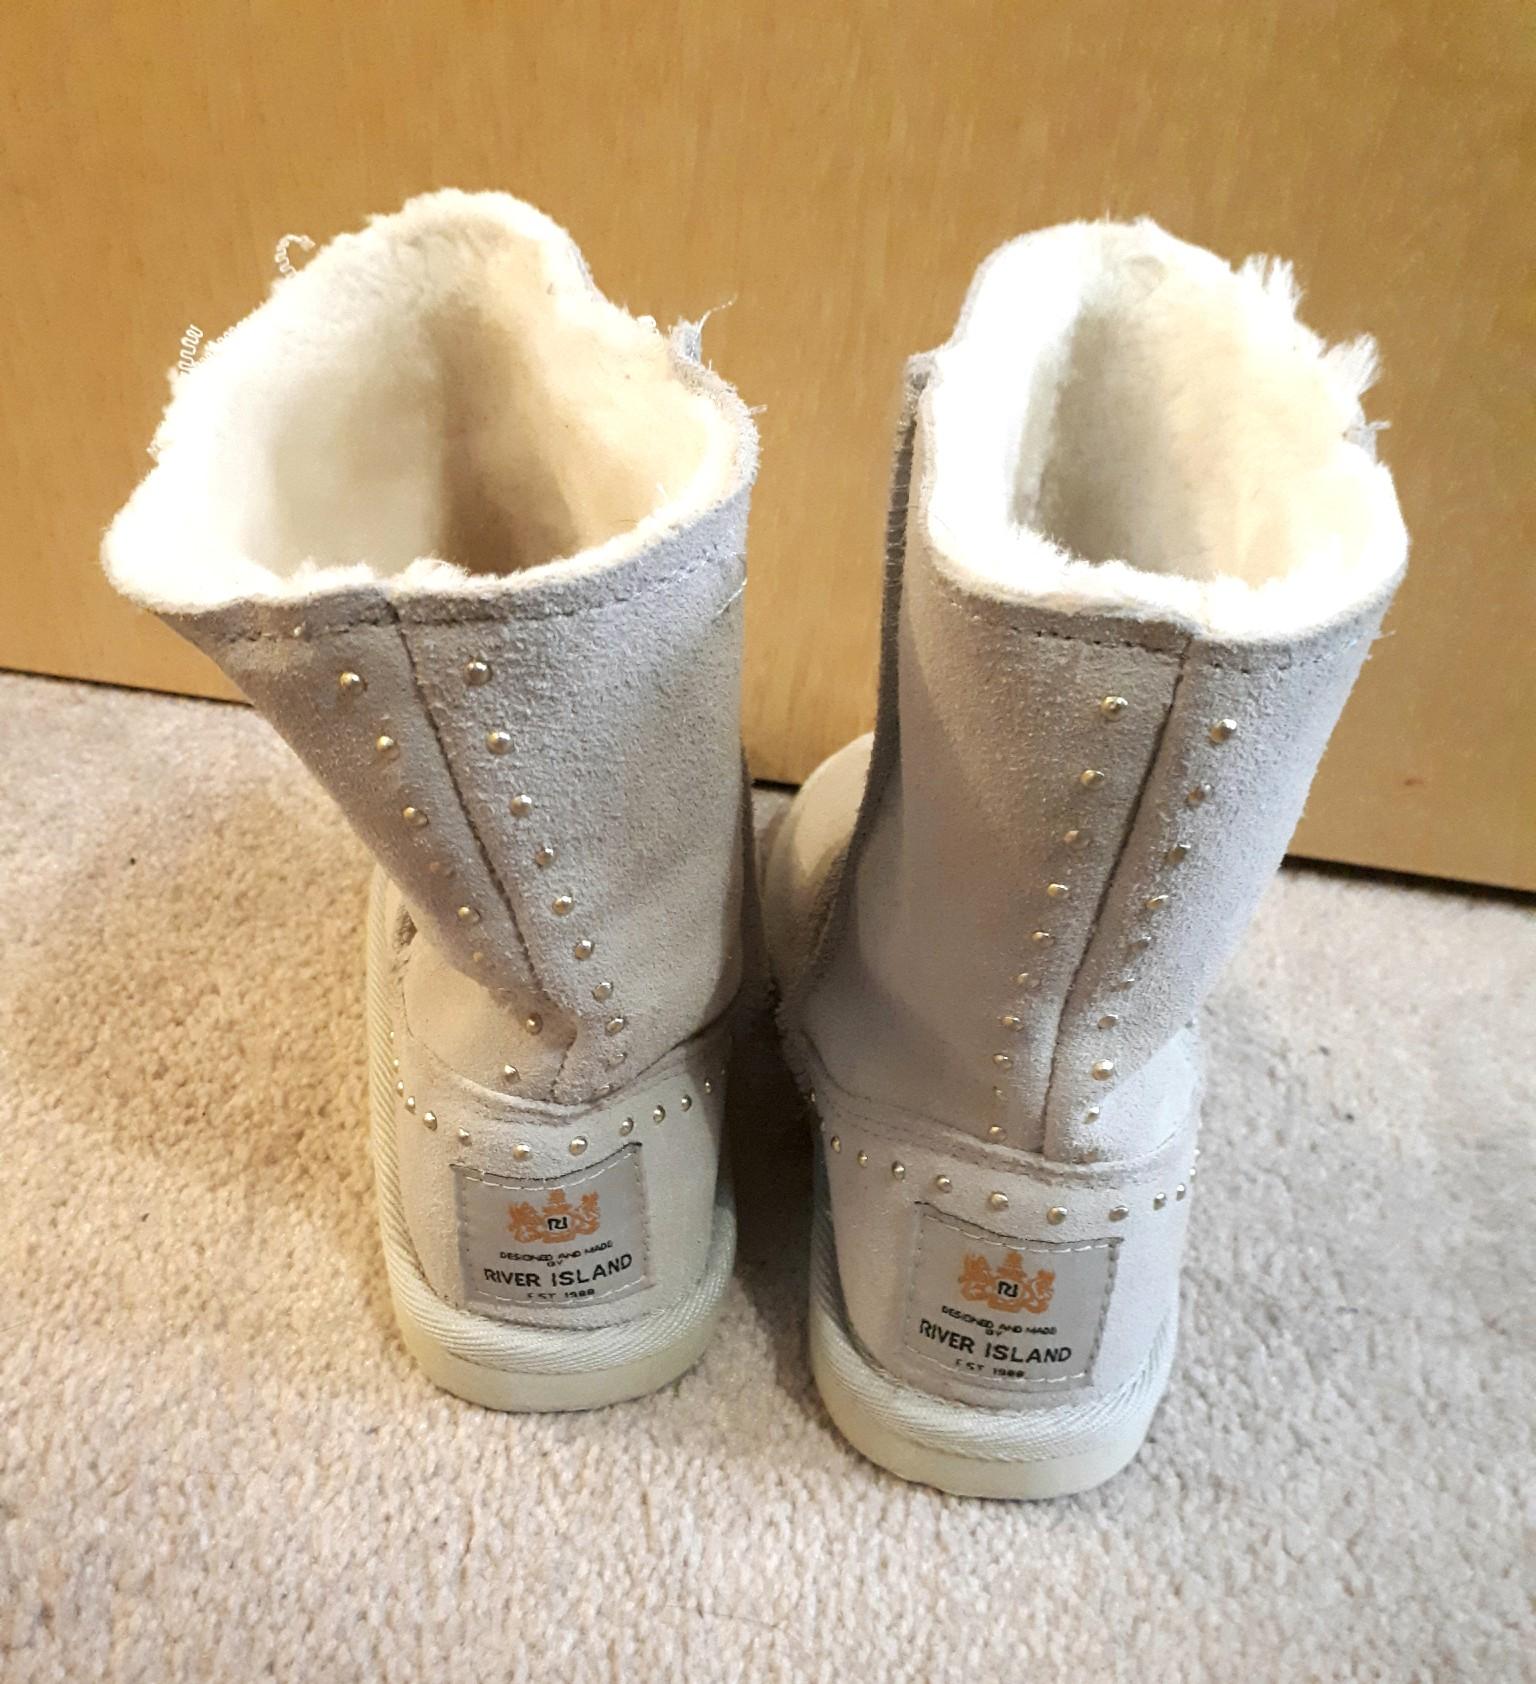 ugg boots rivers